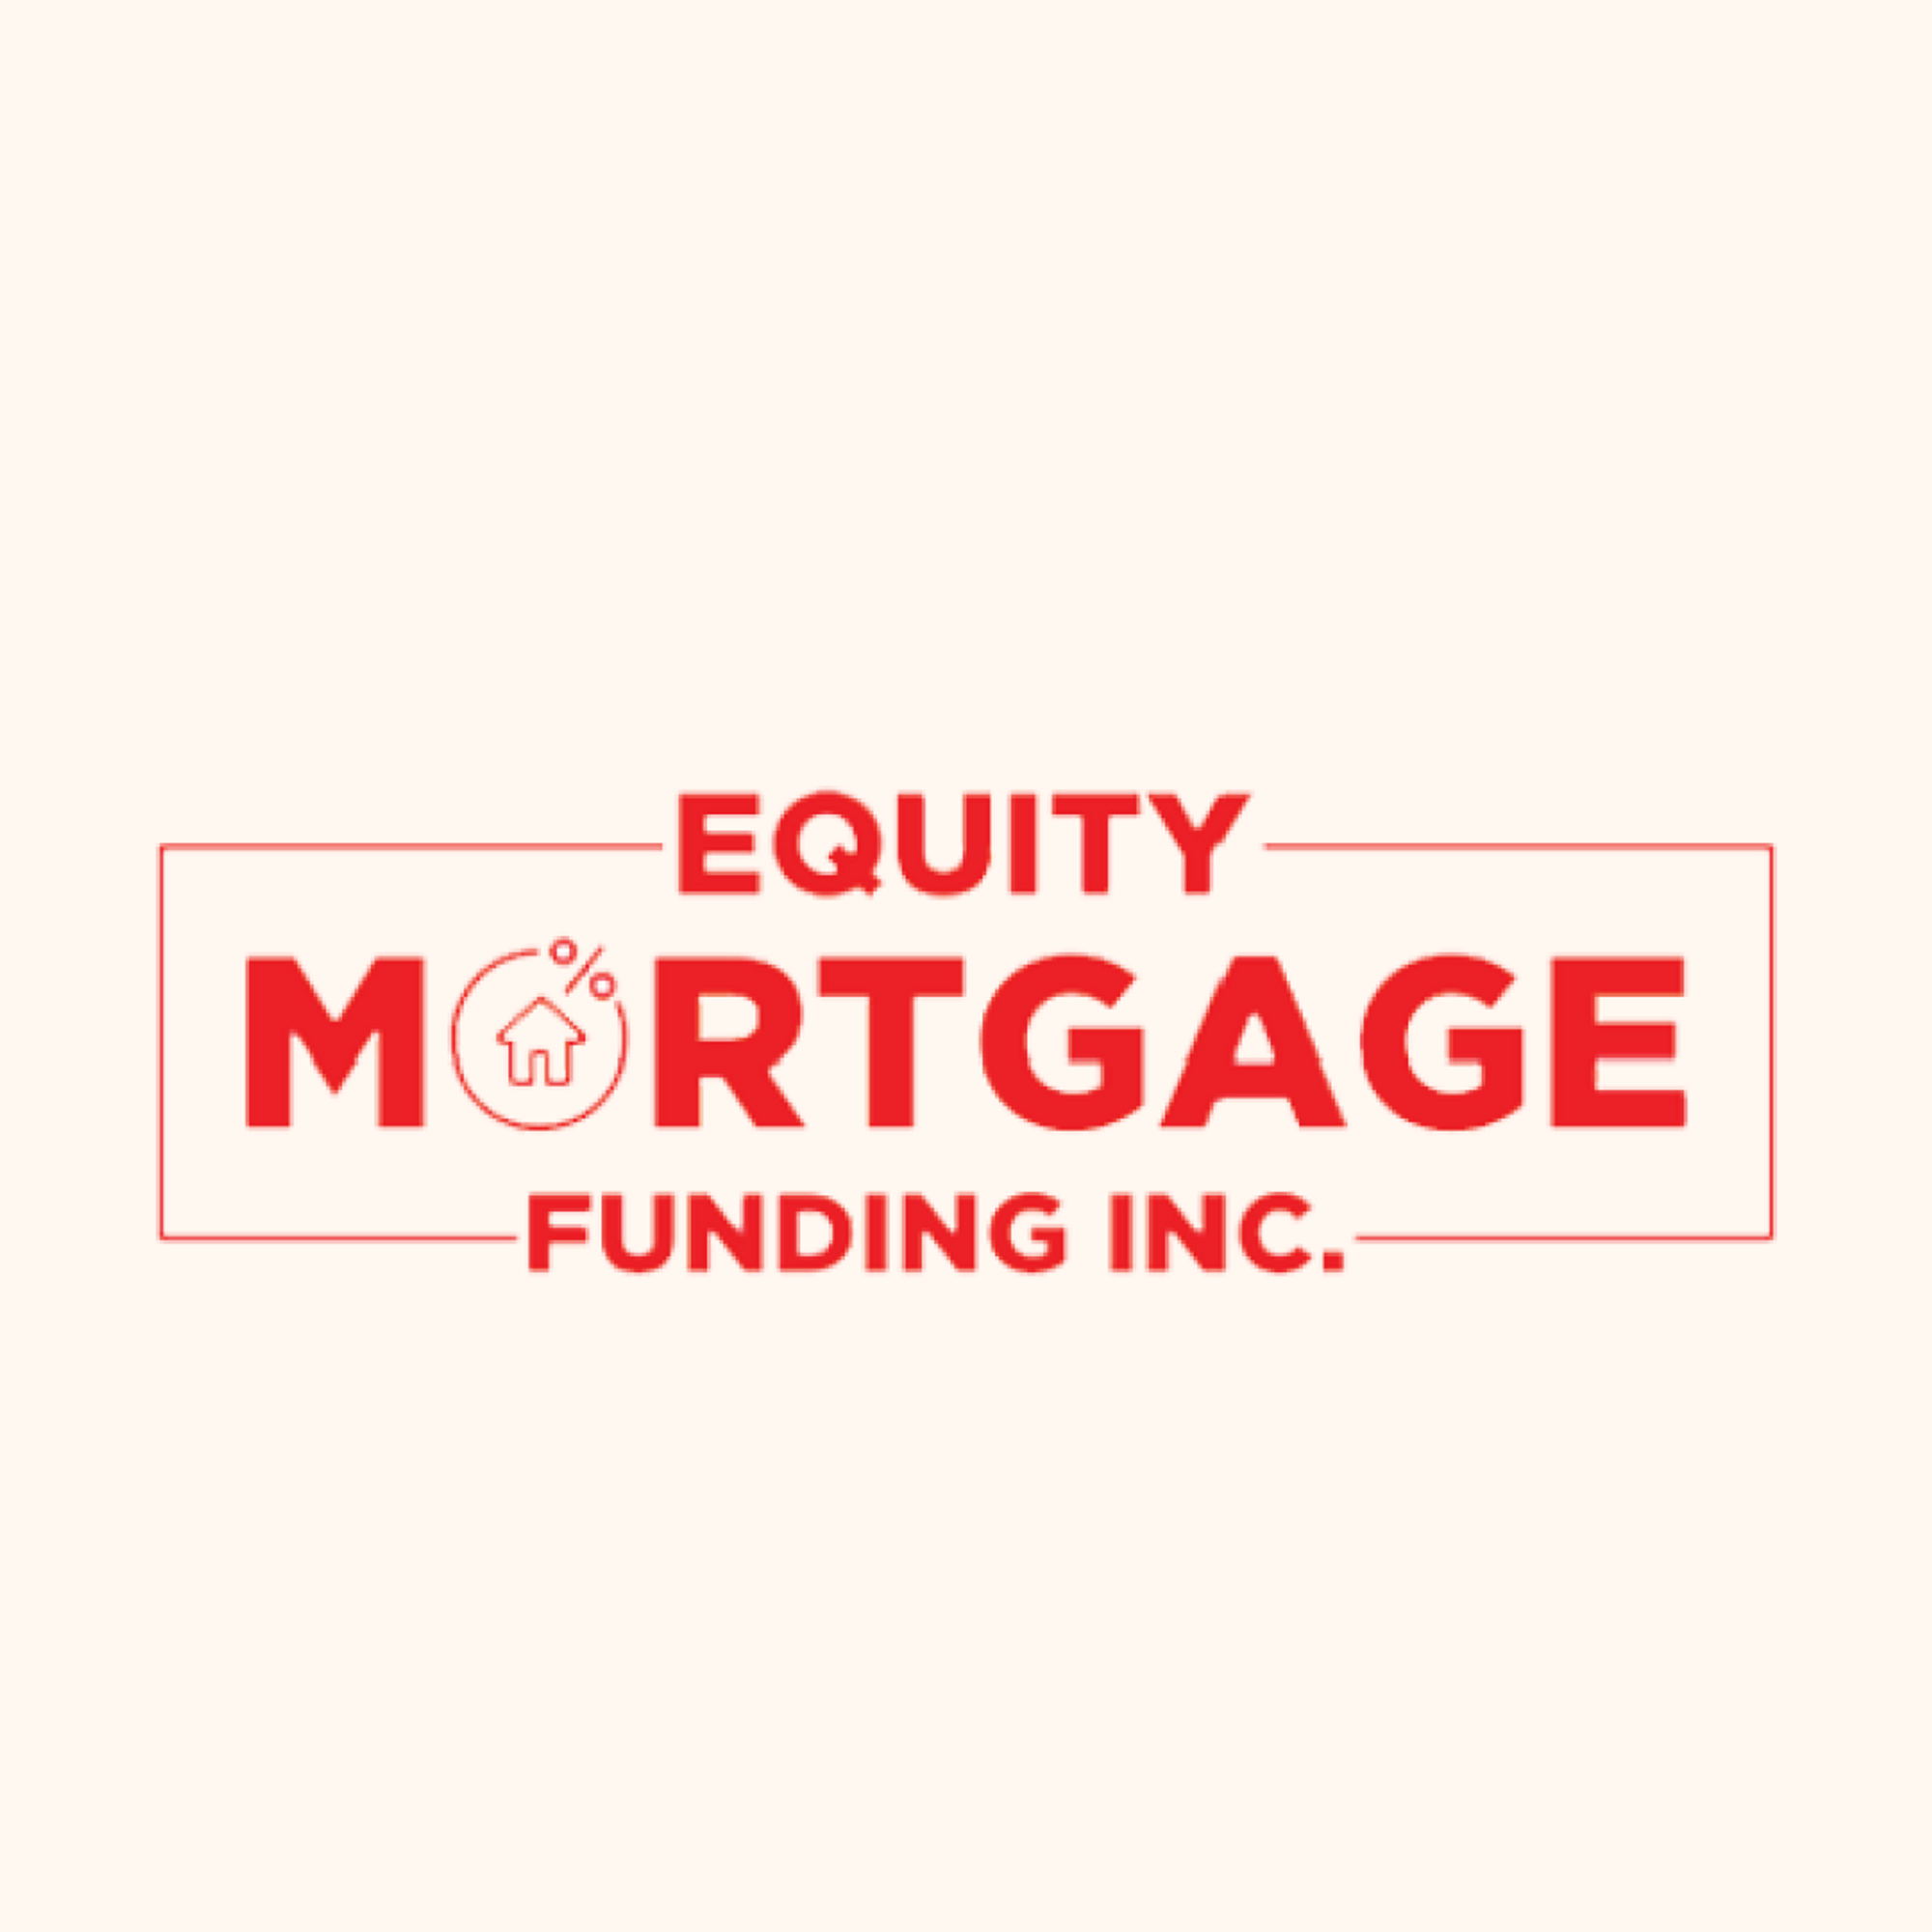 Equity Mortgage Funding Inc.